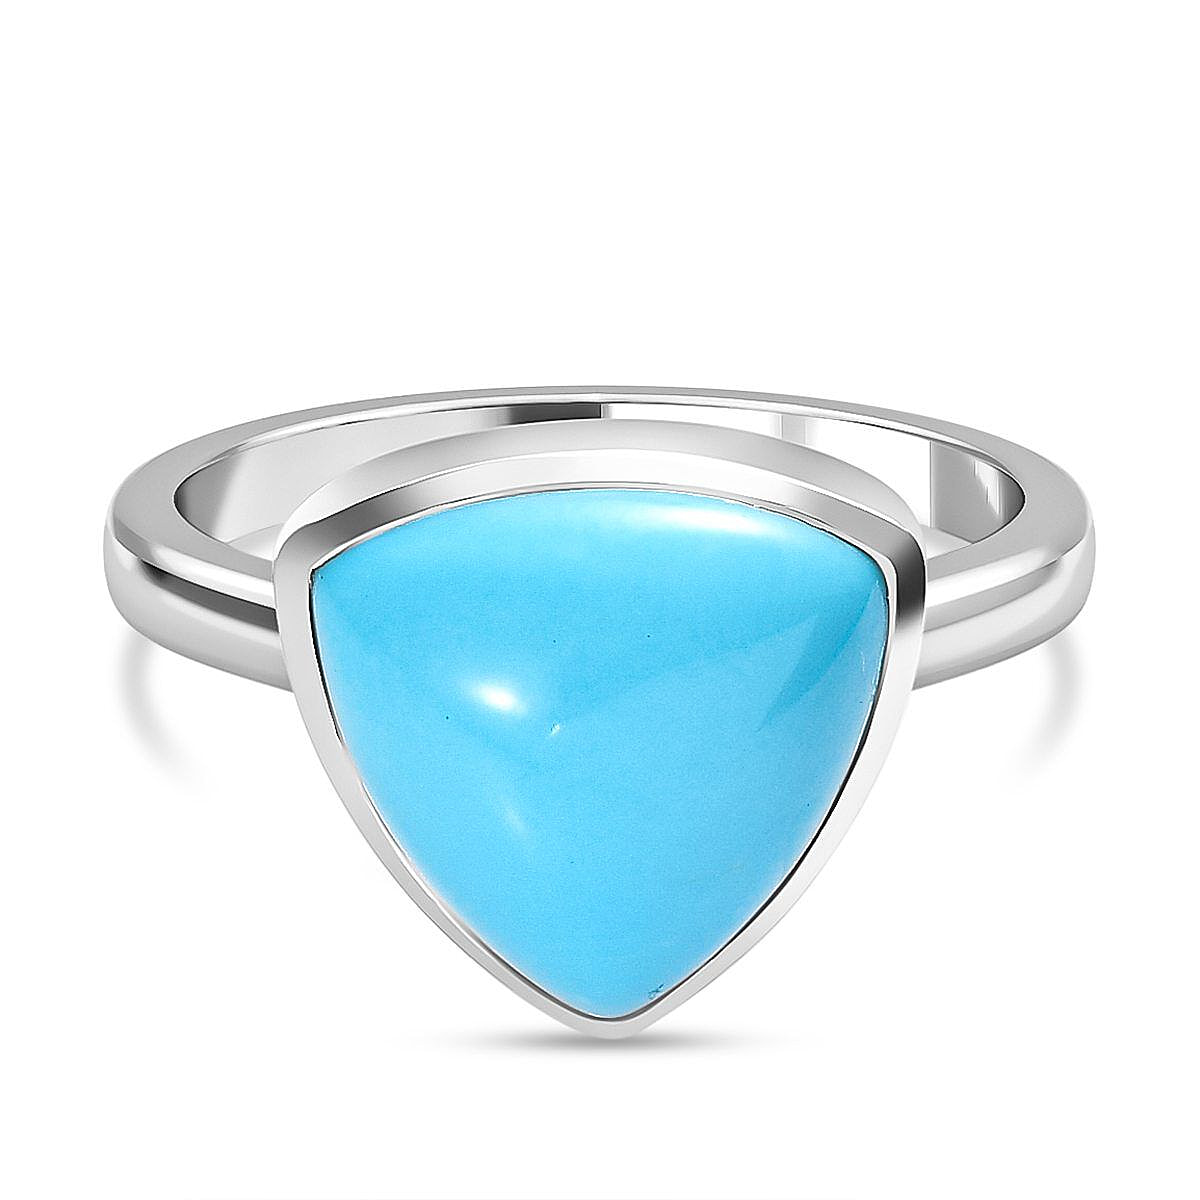 Arizona Sleeping Beauty Turquoise Trillion Ring in Platinum Overlay Sterling Silver 4.72 Ct